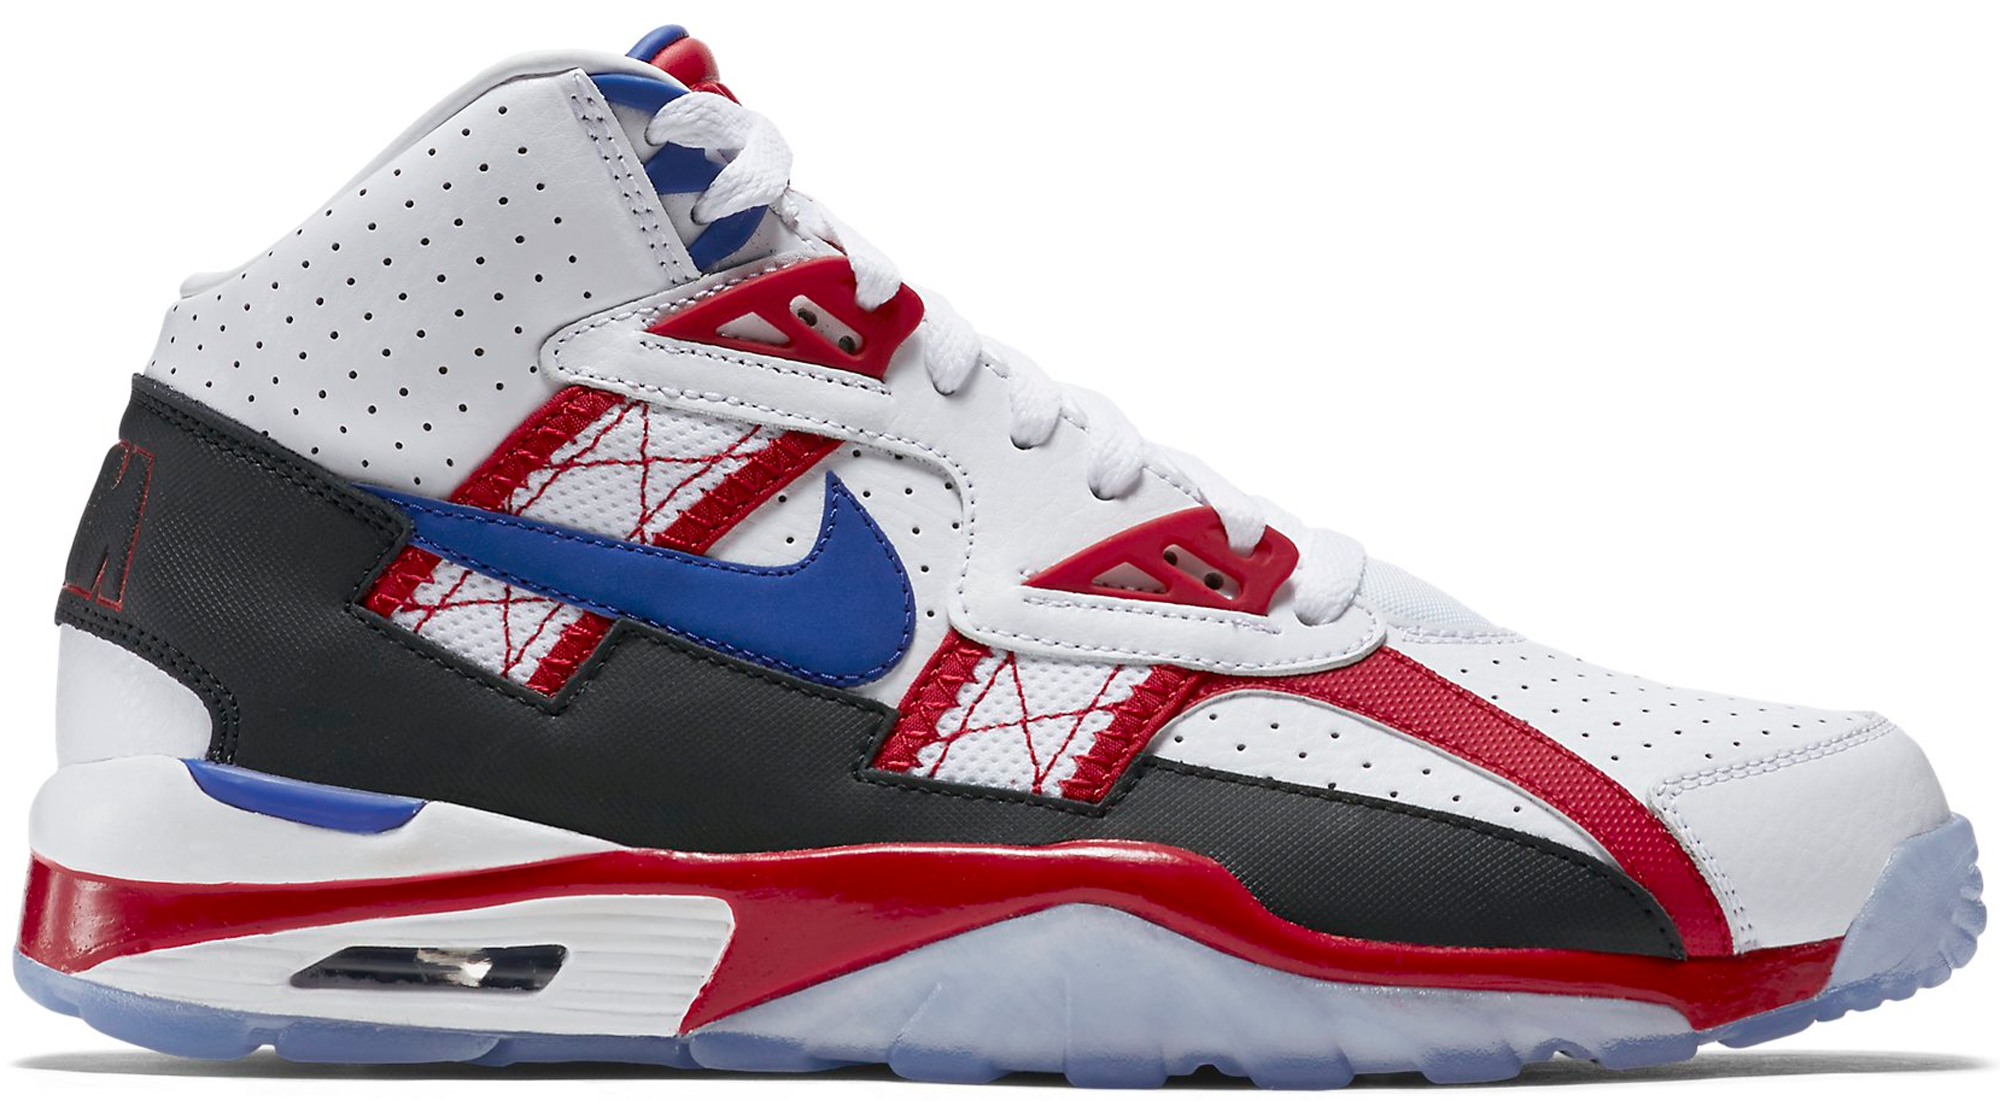 nike air trainer 91 bo knows